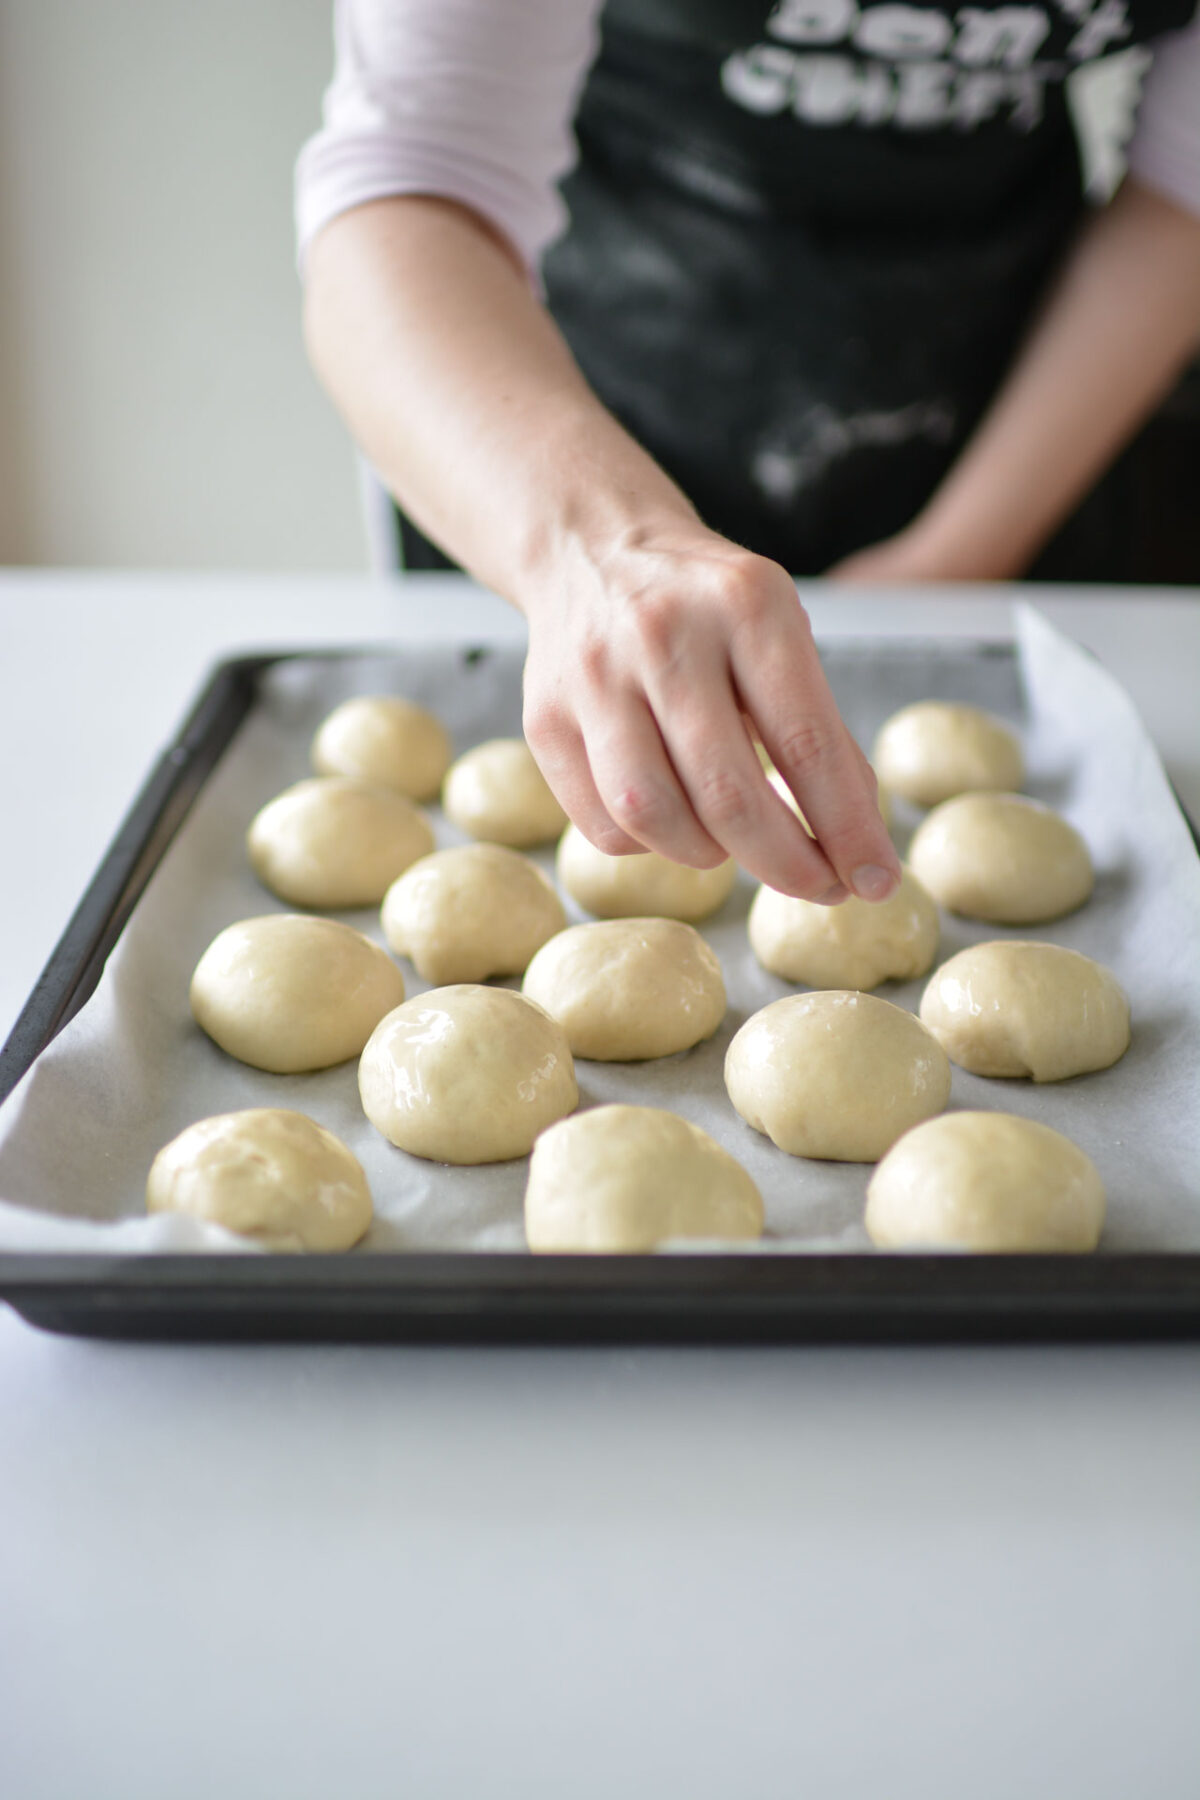 A woman skillfully shaping dough balls on a baking tray in preparation for baking.